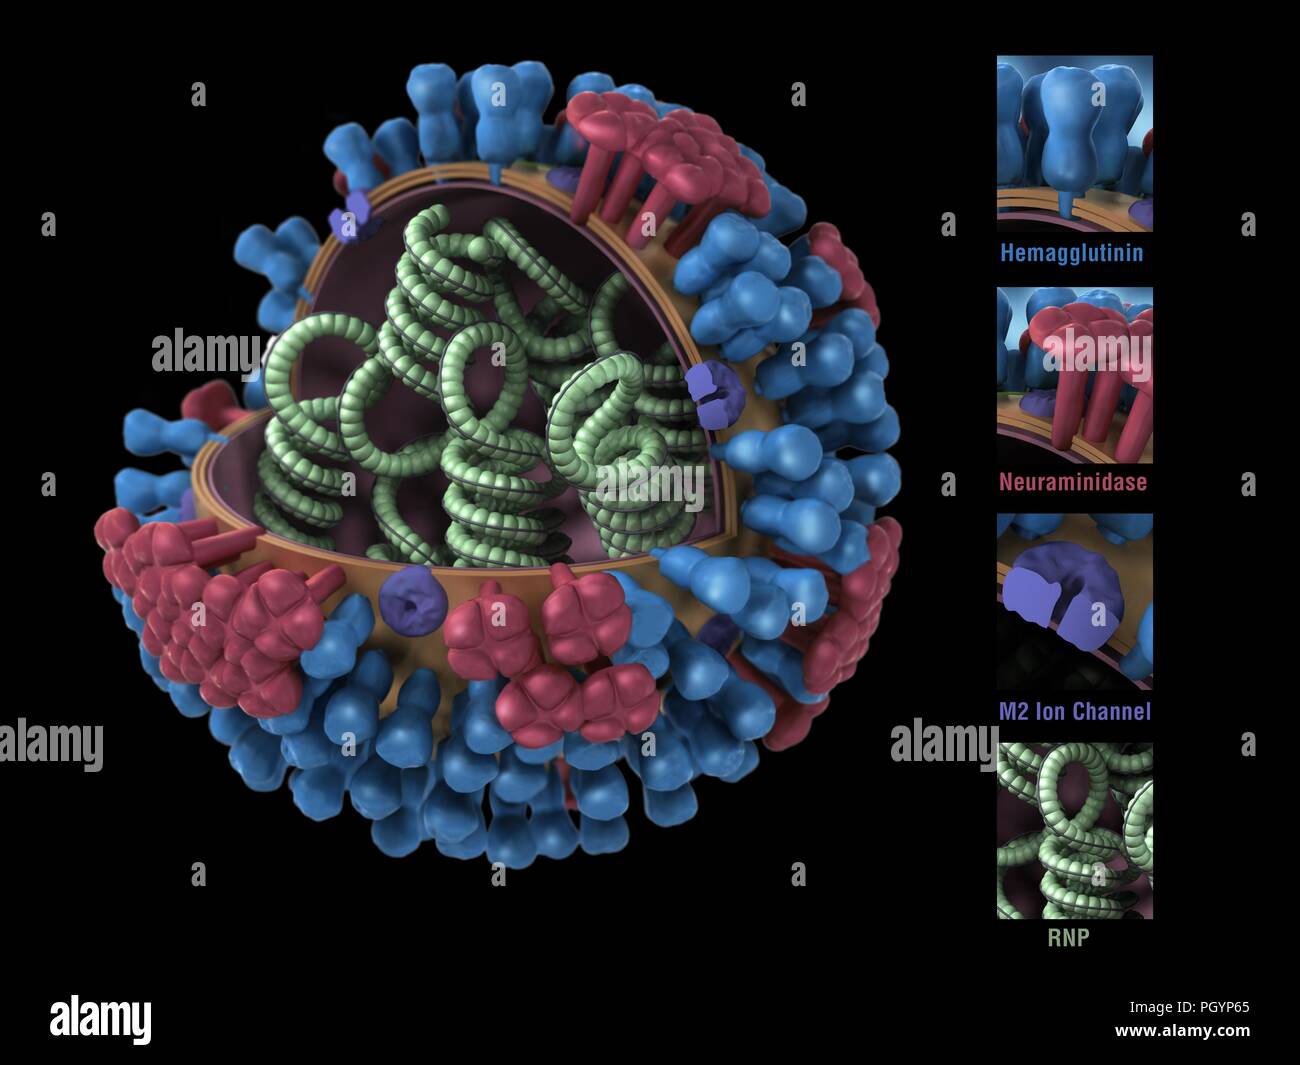 Computer generated 3D model, showing a cross-section of the green RNP spirals, blue hemagglutinin, red neuraminidase, and purple m2 ion channels that constitute the structure of the Influenza A Virus (Orthomyxovirus family) image courtesy CDC/Douglas Jordan, 2009. () Stock Photo